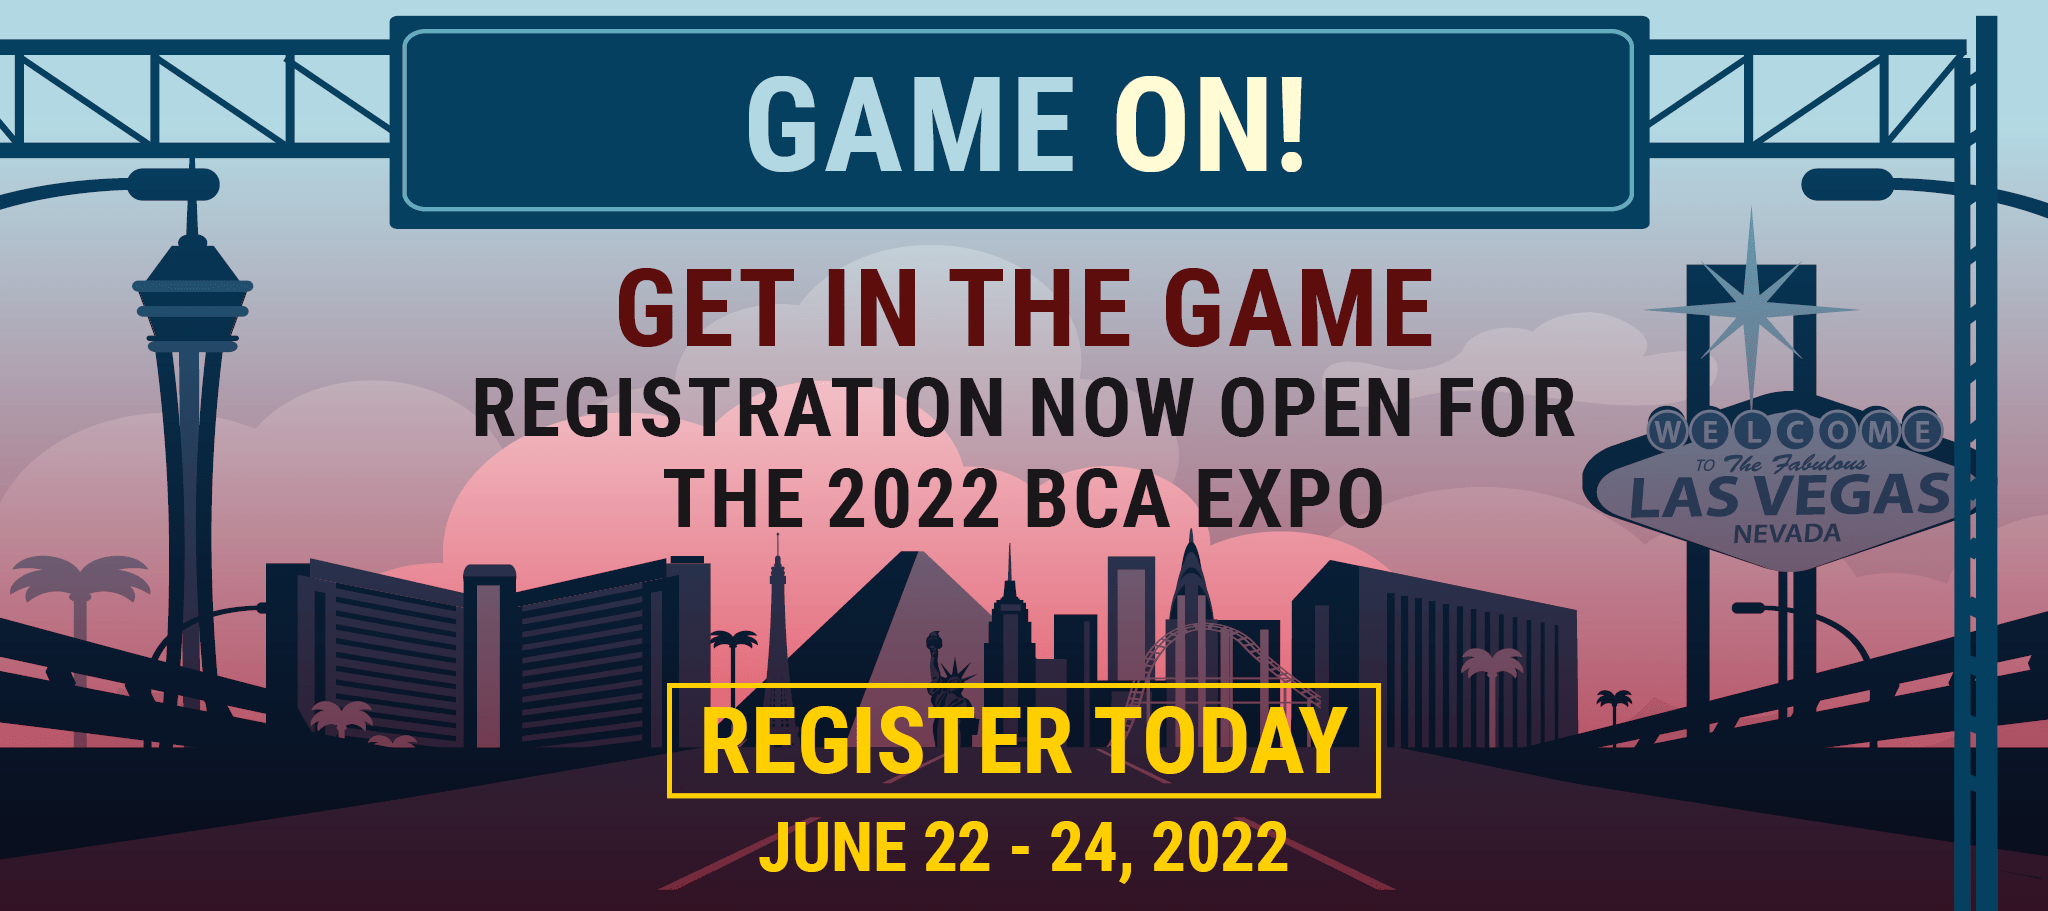 Get in the Game: Registration now open for the 2022 BCA Expo